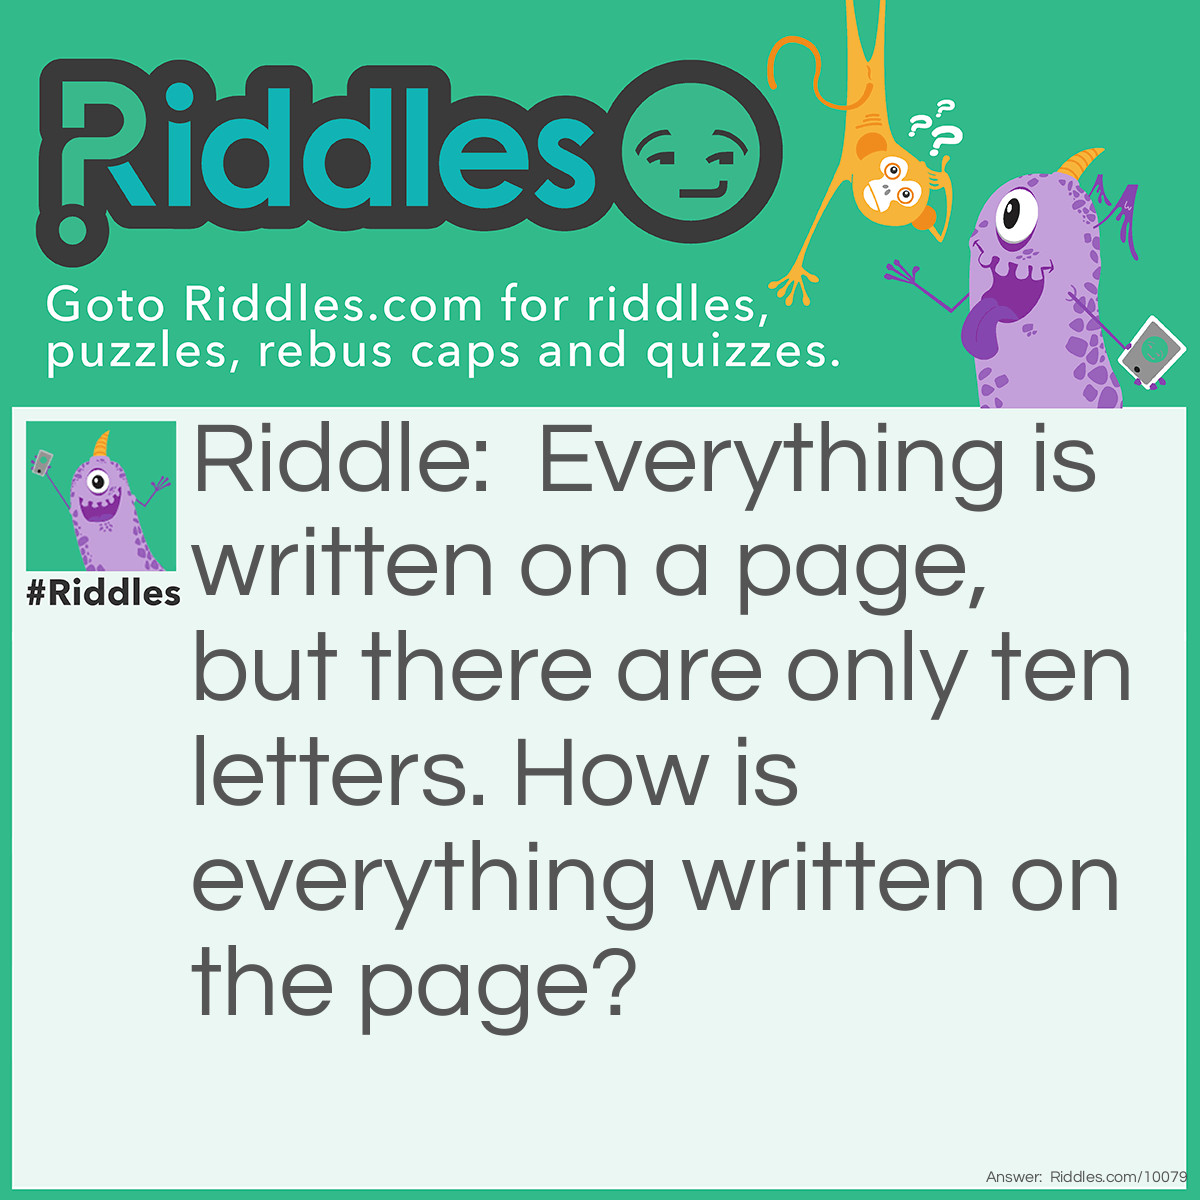 Riddle: Everything is written on a page, but there are only ten letters. How is everything written on the page? Answer: The answer is the word everything.